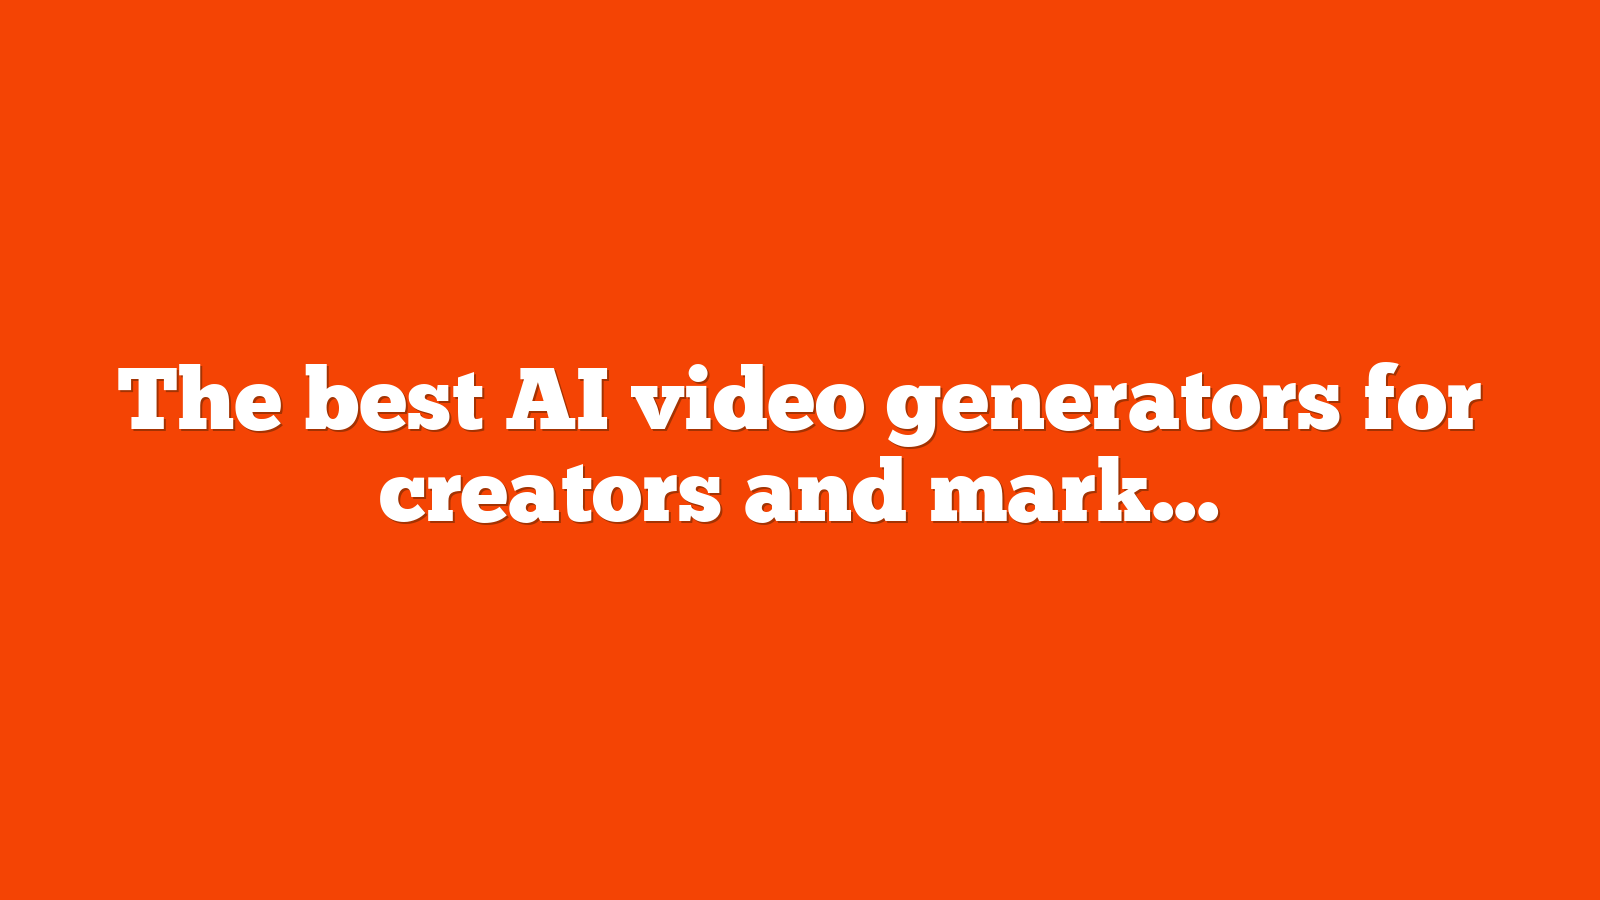 The best AI video generators for creators and marketers